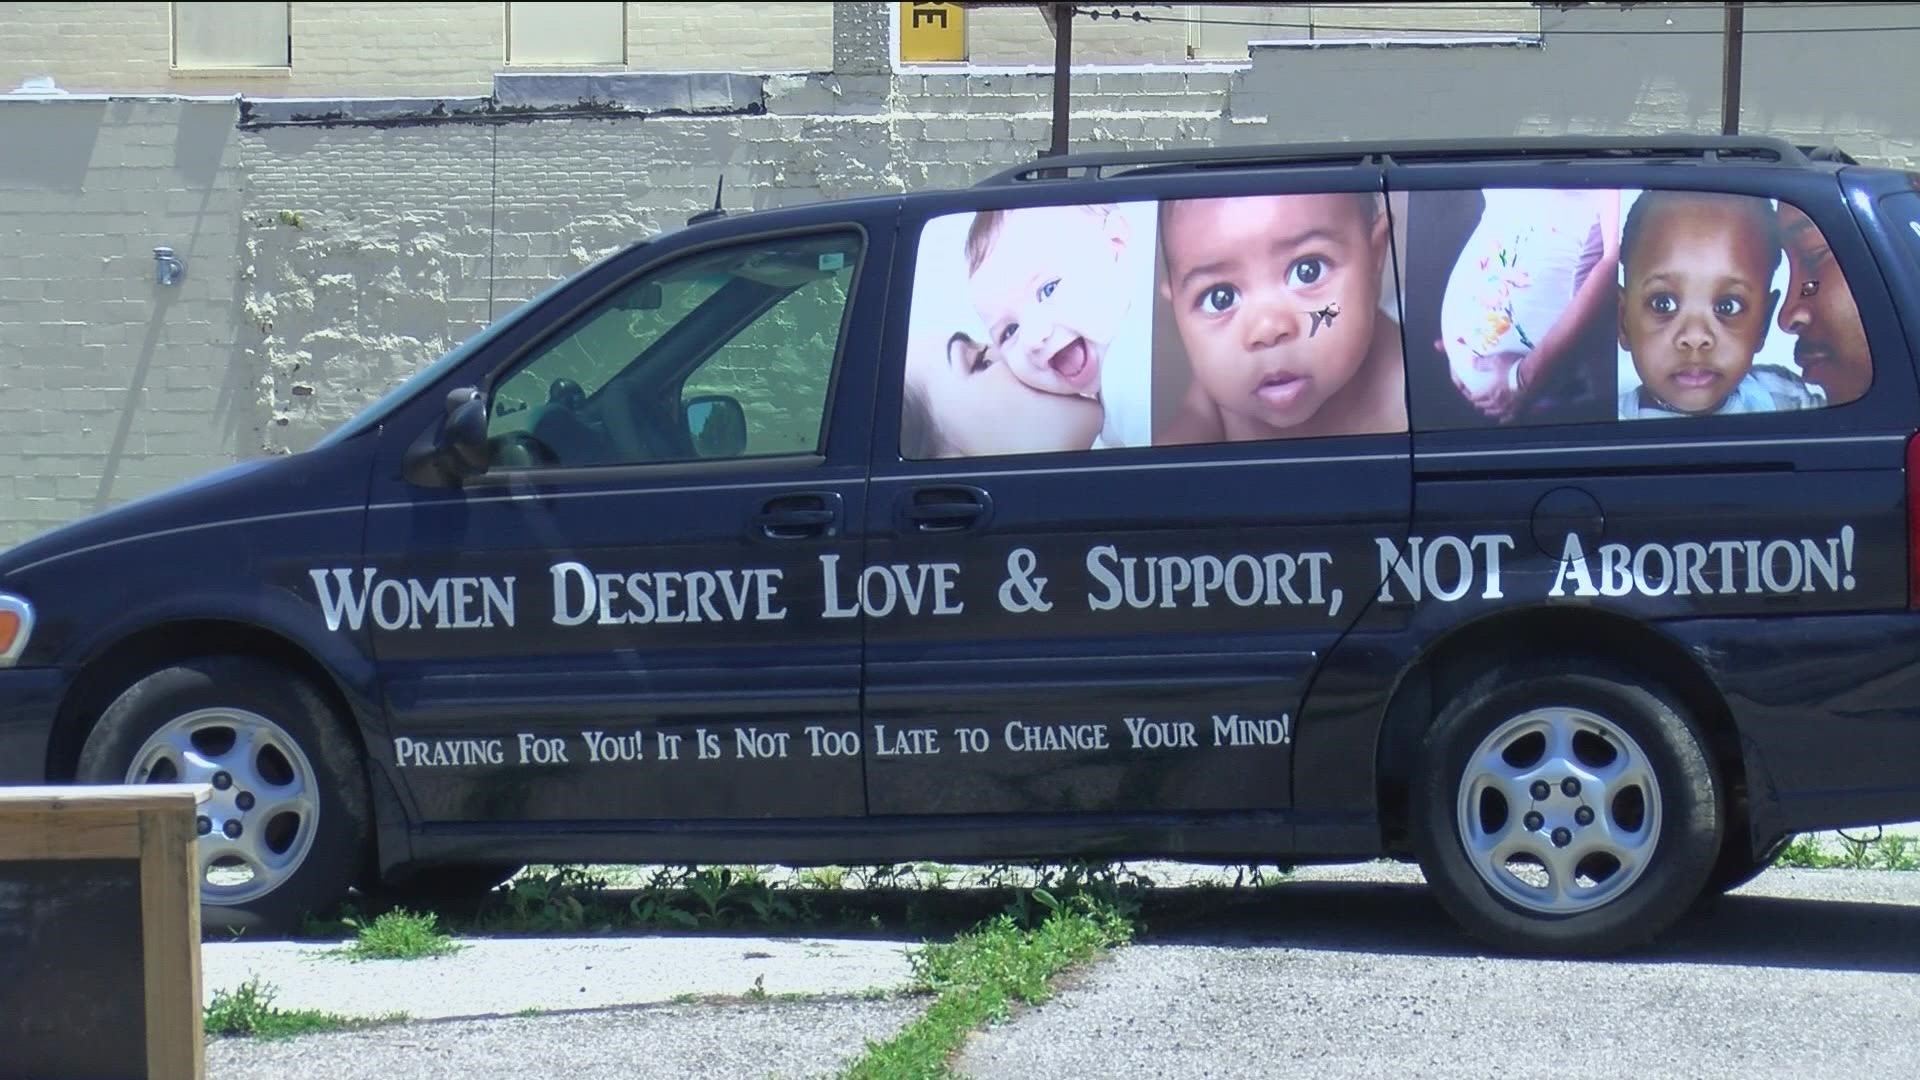 People on both sides of the abortion issue were emotional Friday.